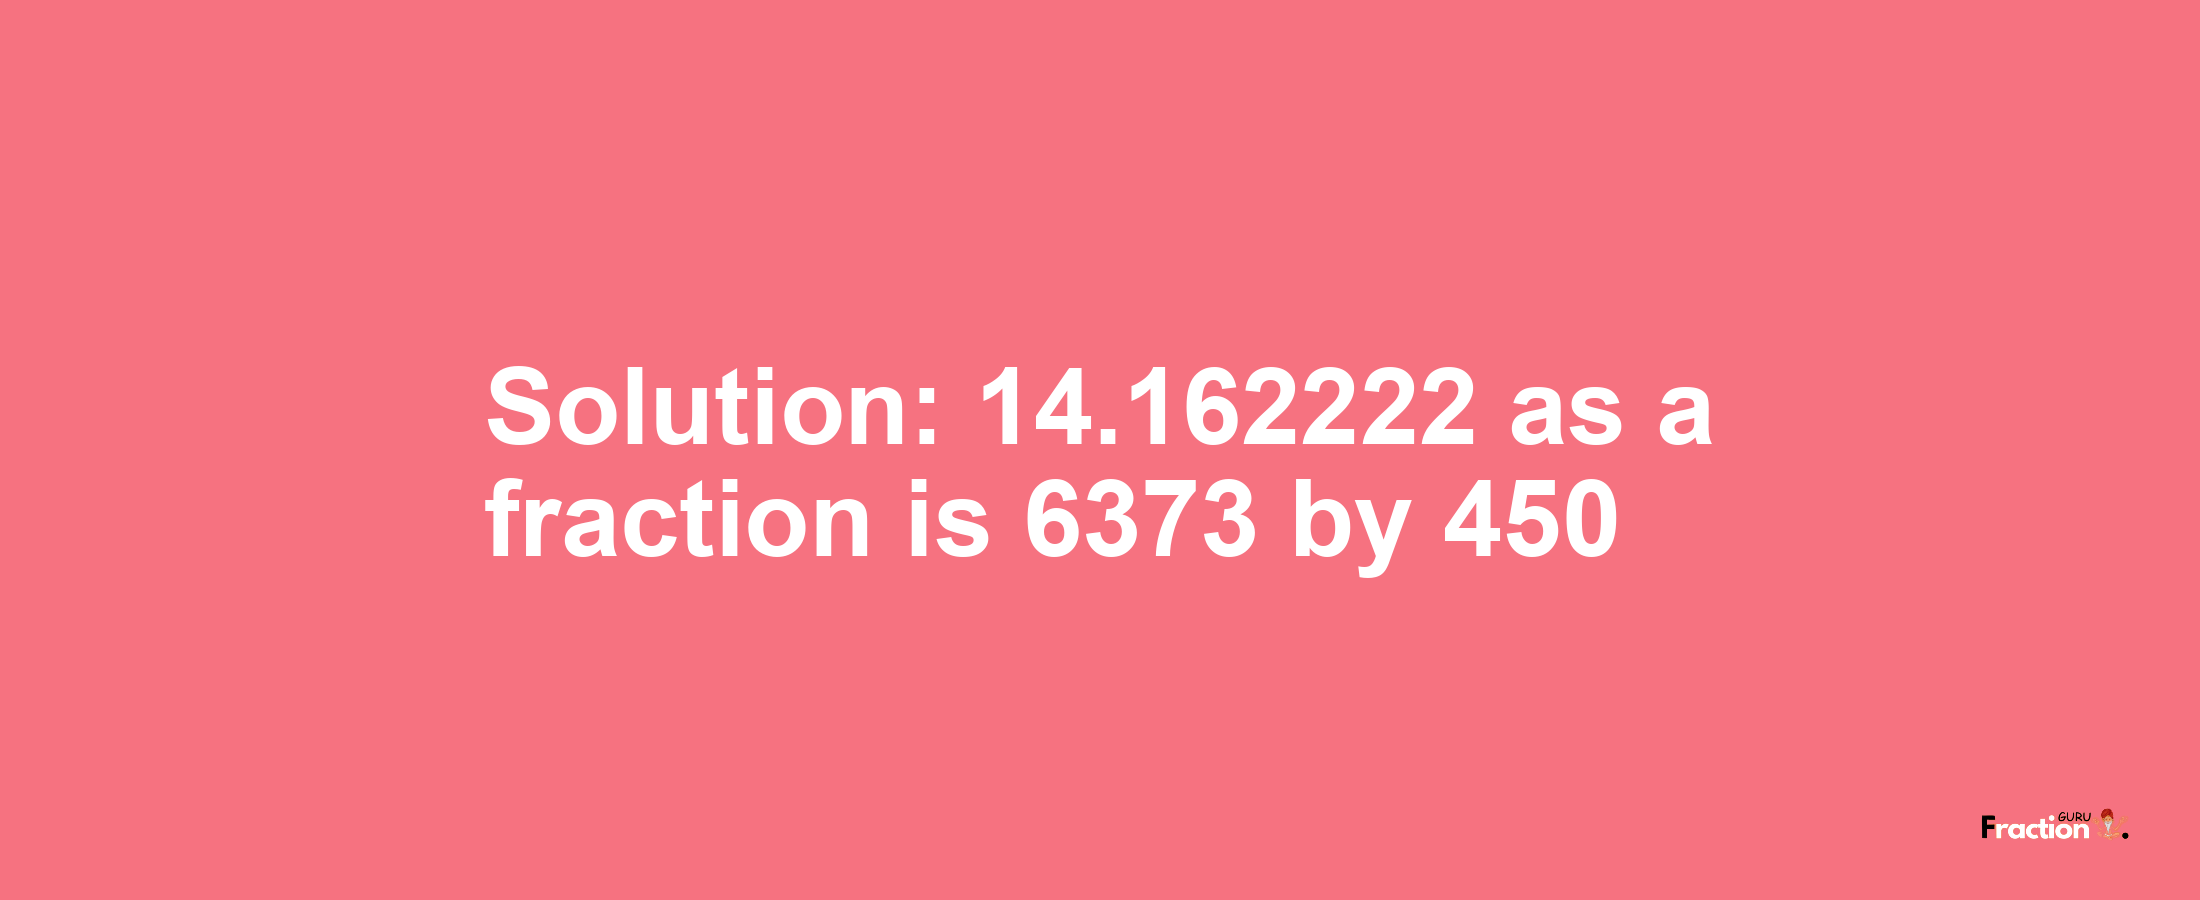 Solution:14.162222 as a fraction is 6373/450